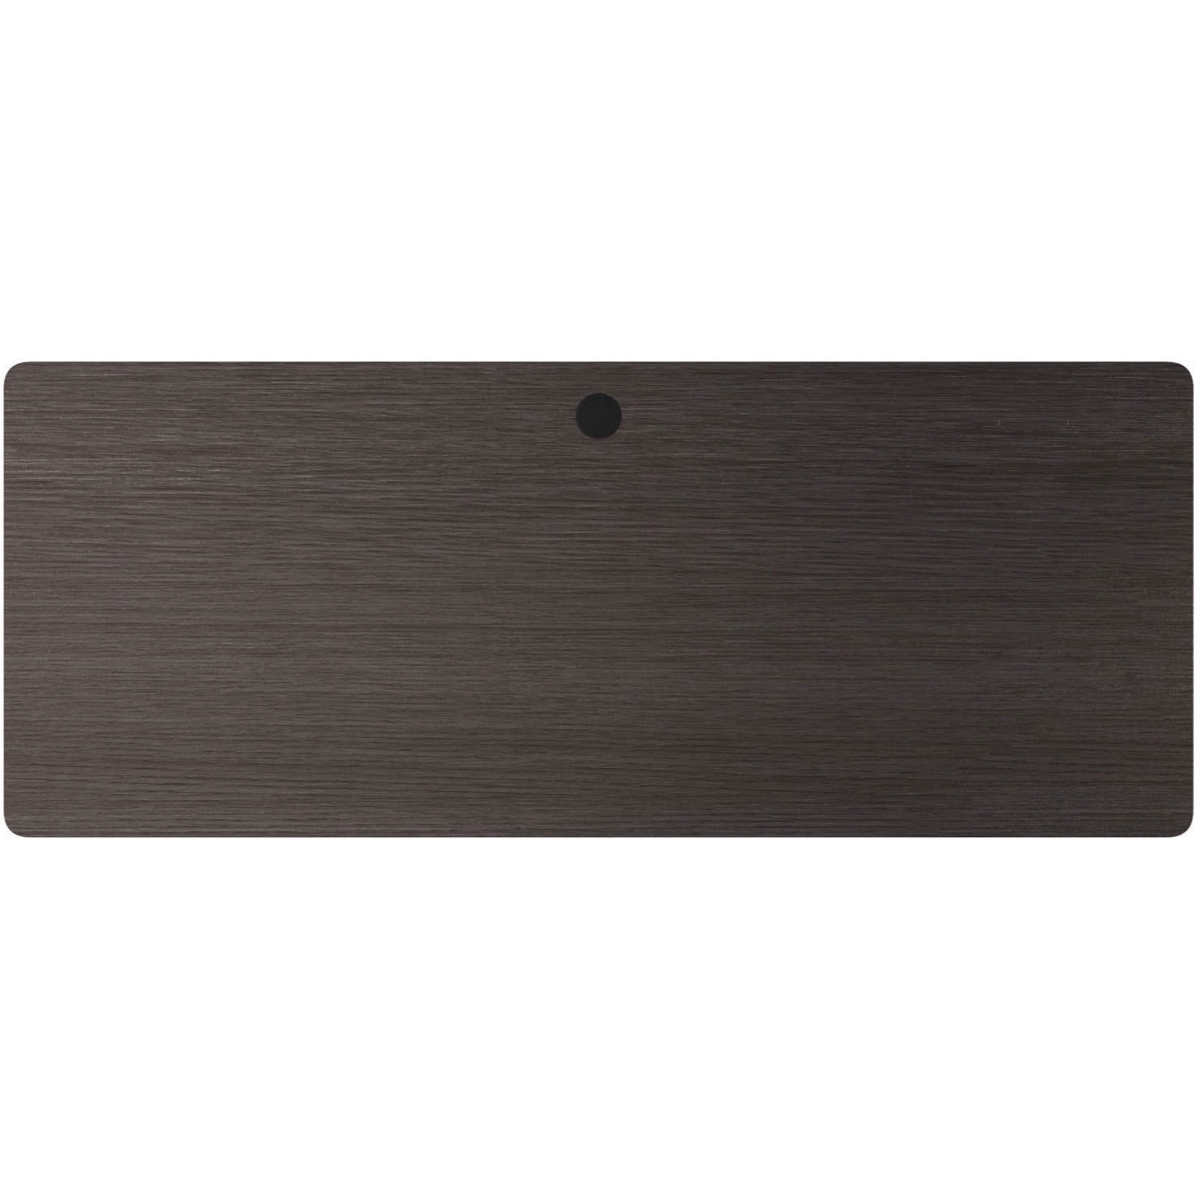 Llr00022 Fortress Educator Desk Laminate Worksurface, Charcoal Gray